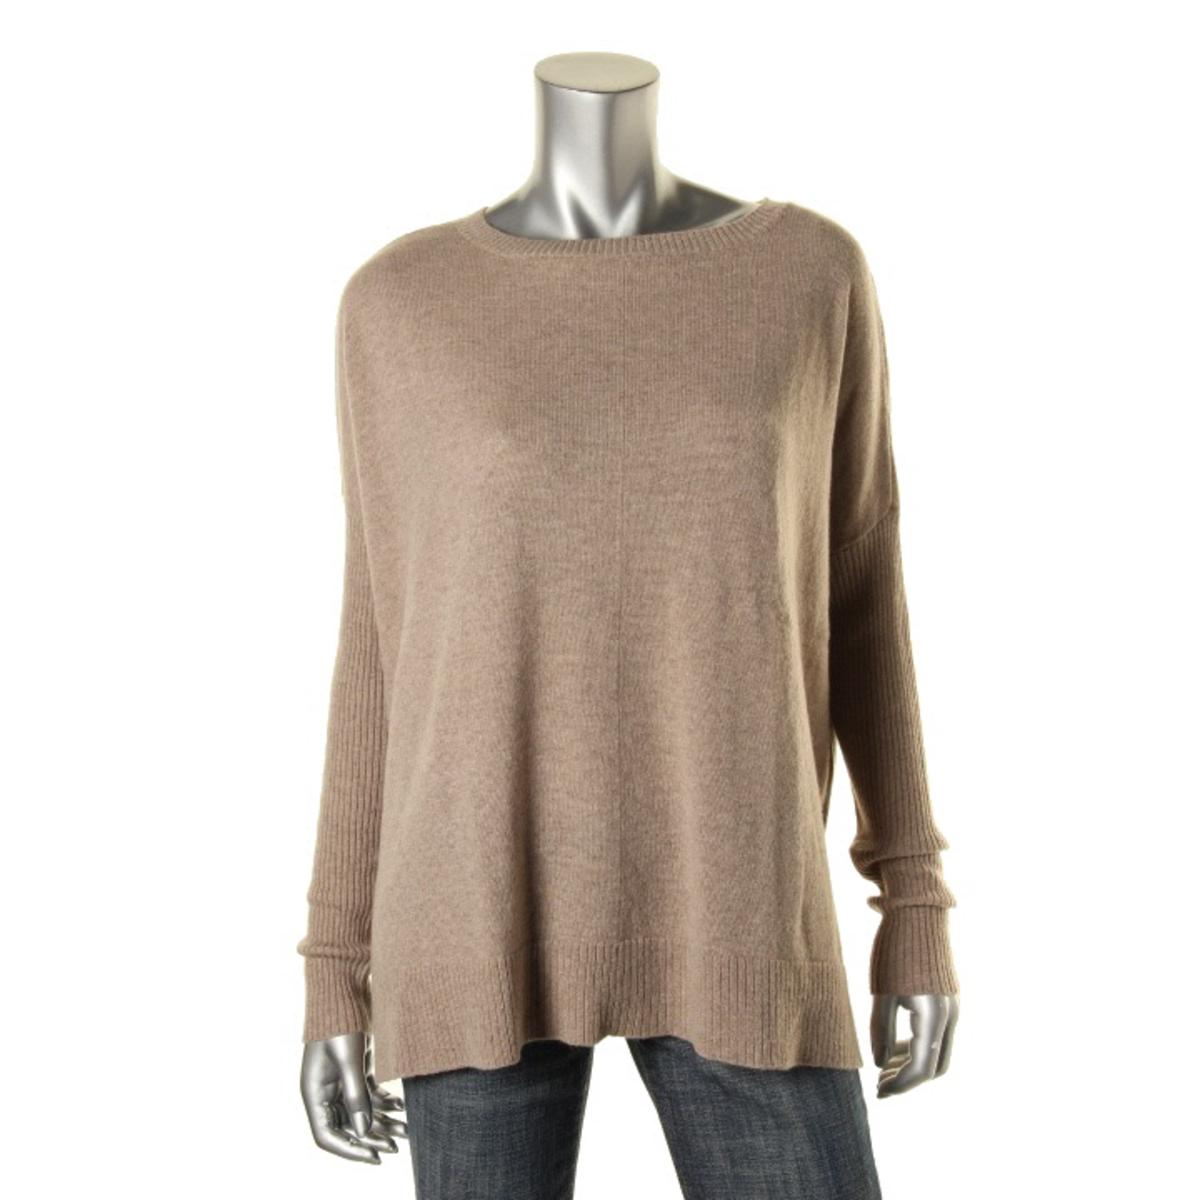 Hayden 5721 Womens Taupe Cashmere Heathered Boatneck Pullover Sweater M ...